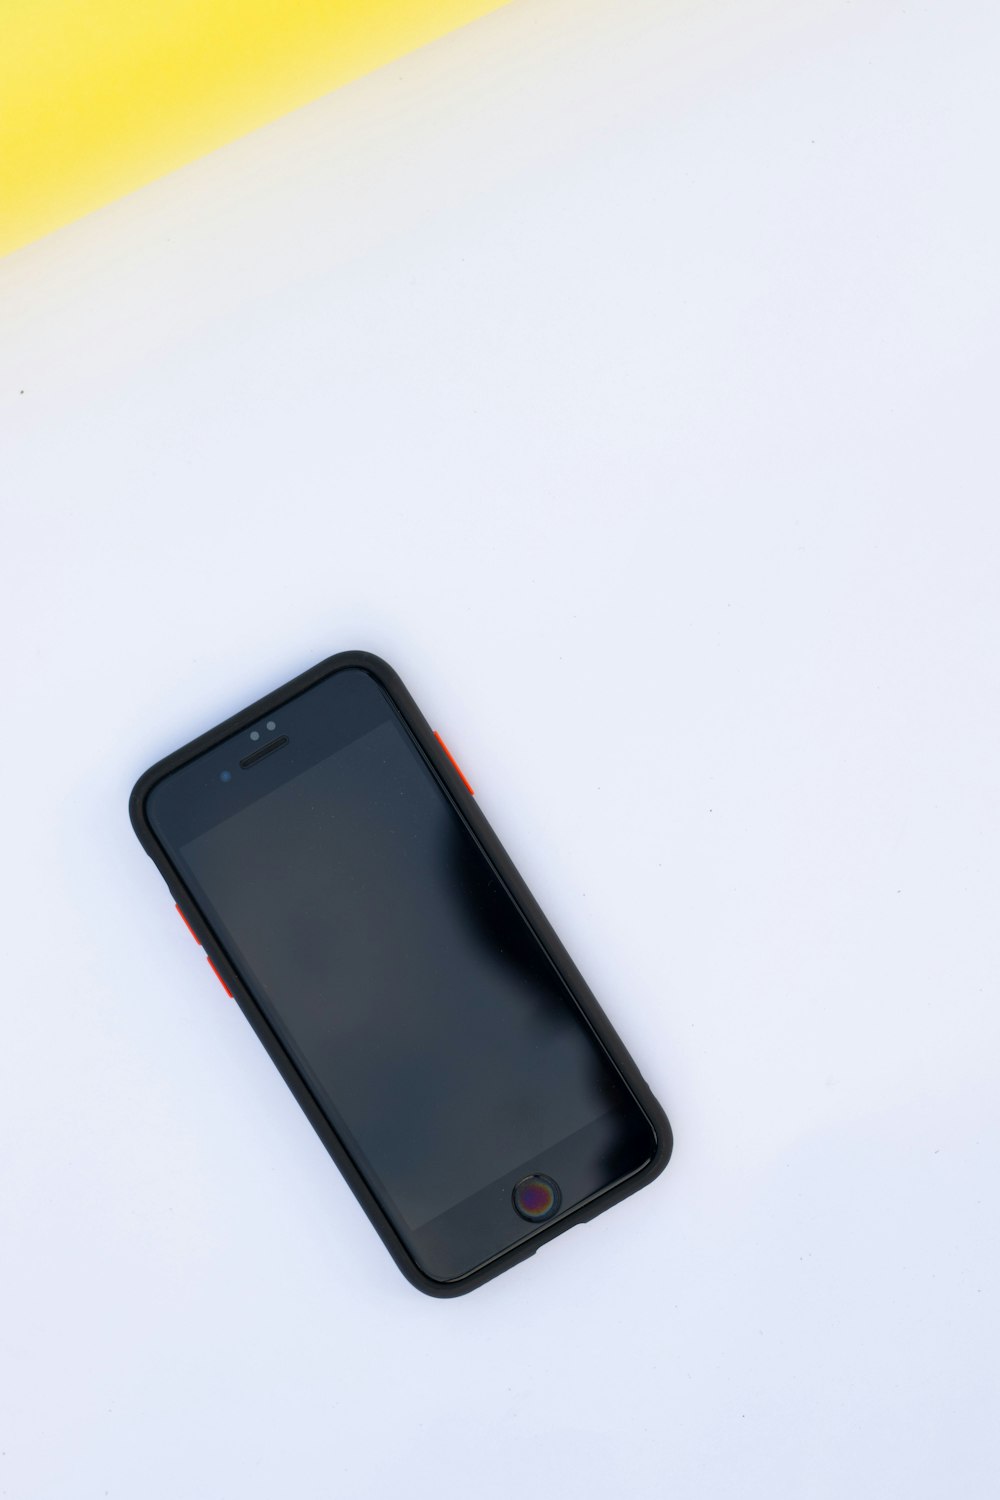 black iphone 5 on white table